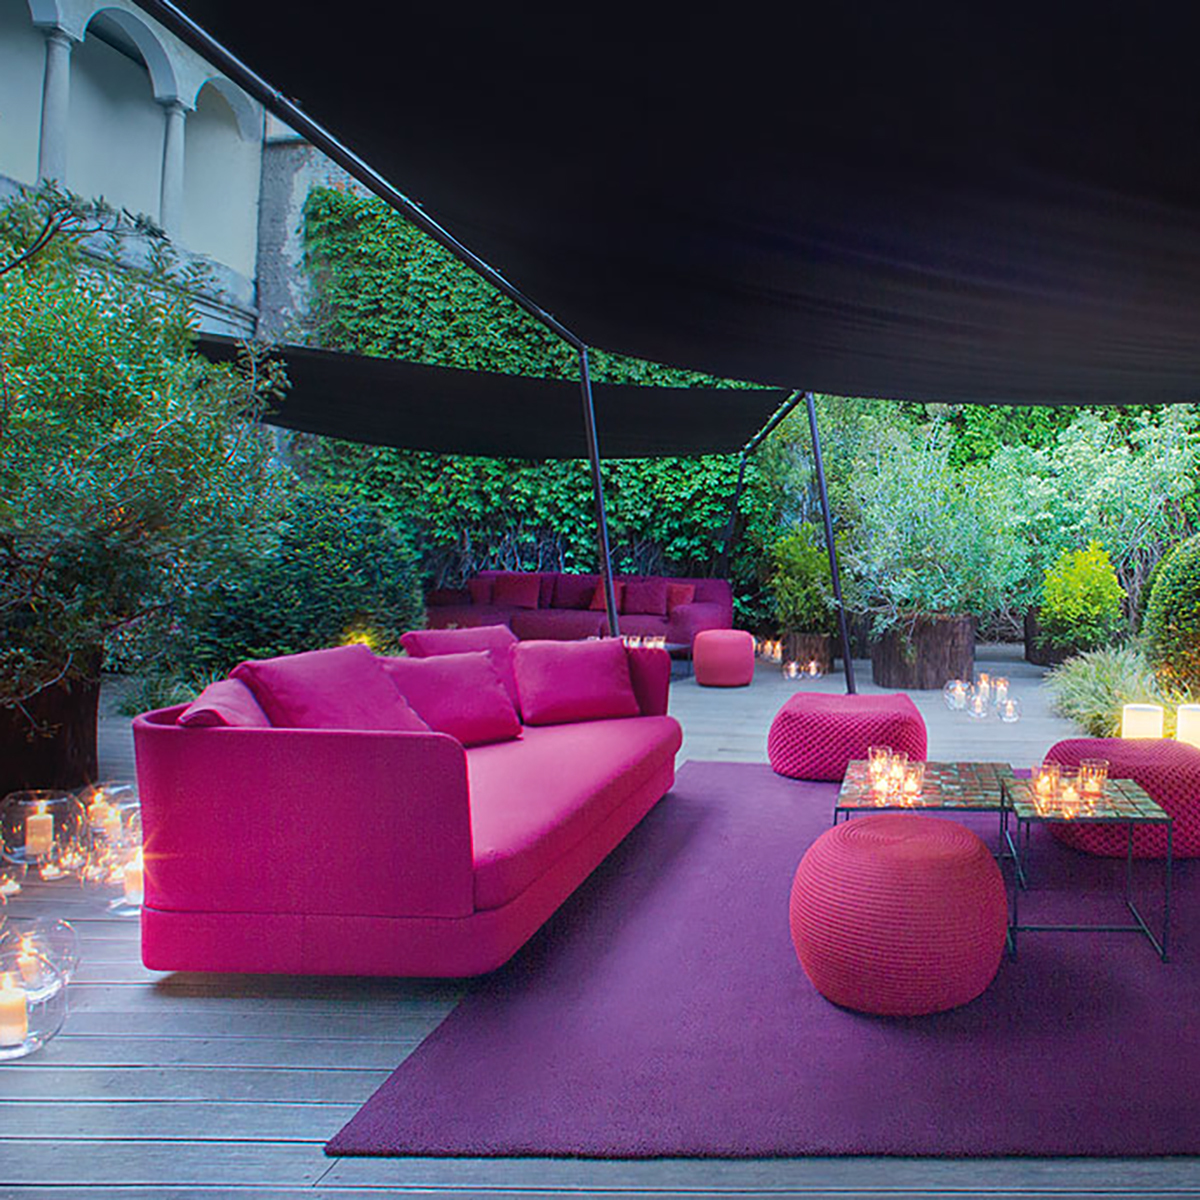 Paola Lenti with The Modern Garden Company